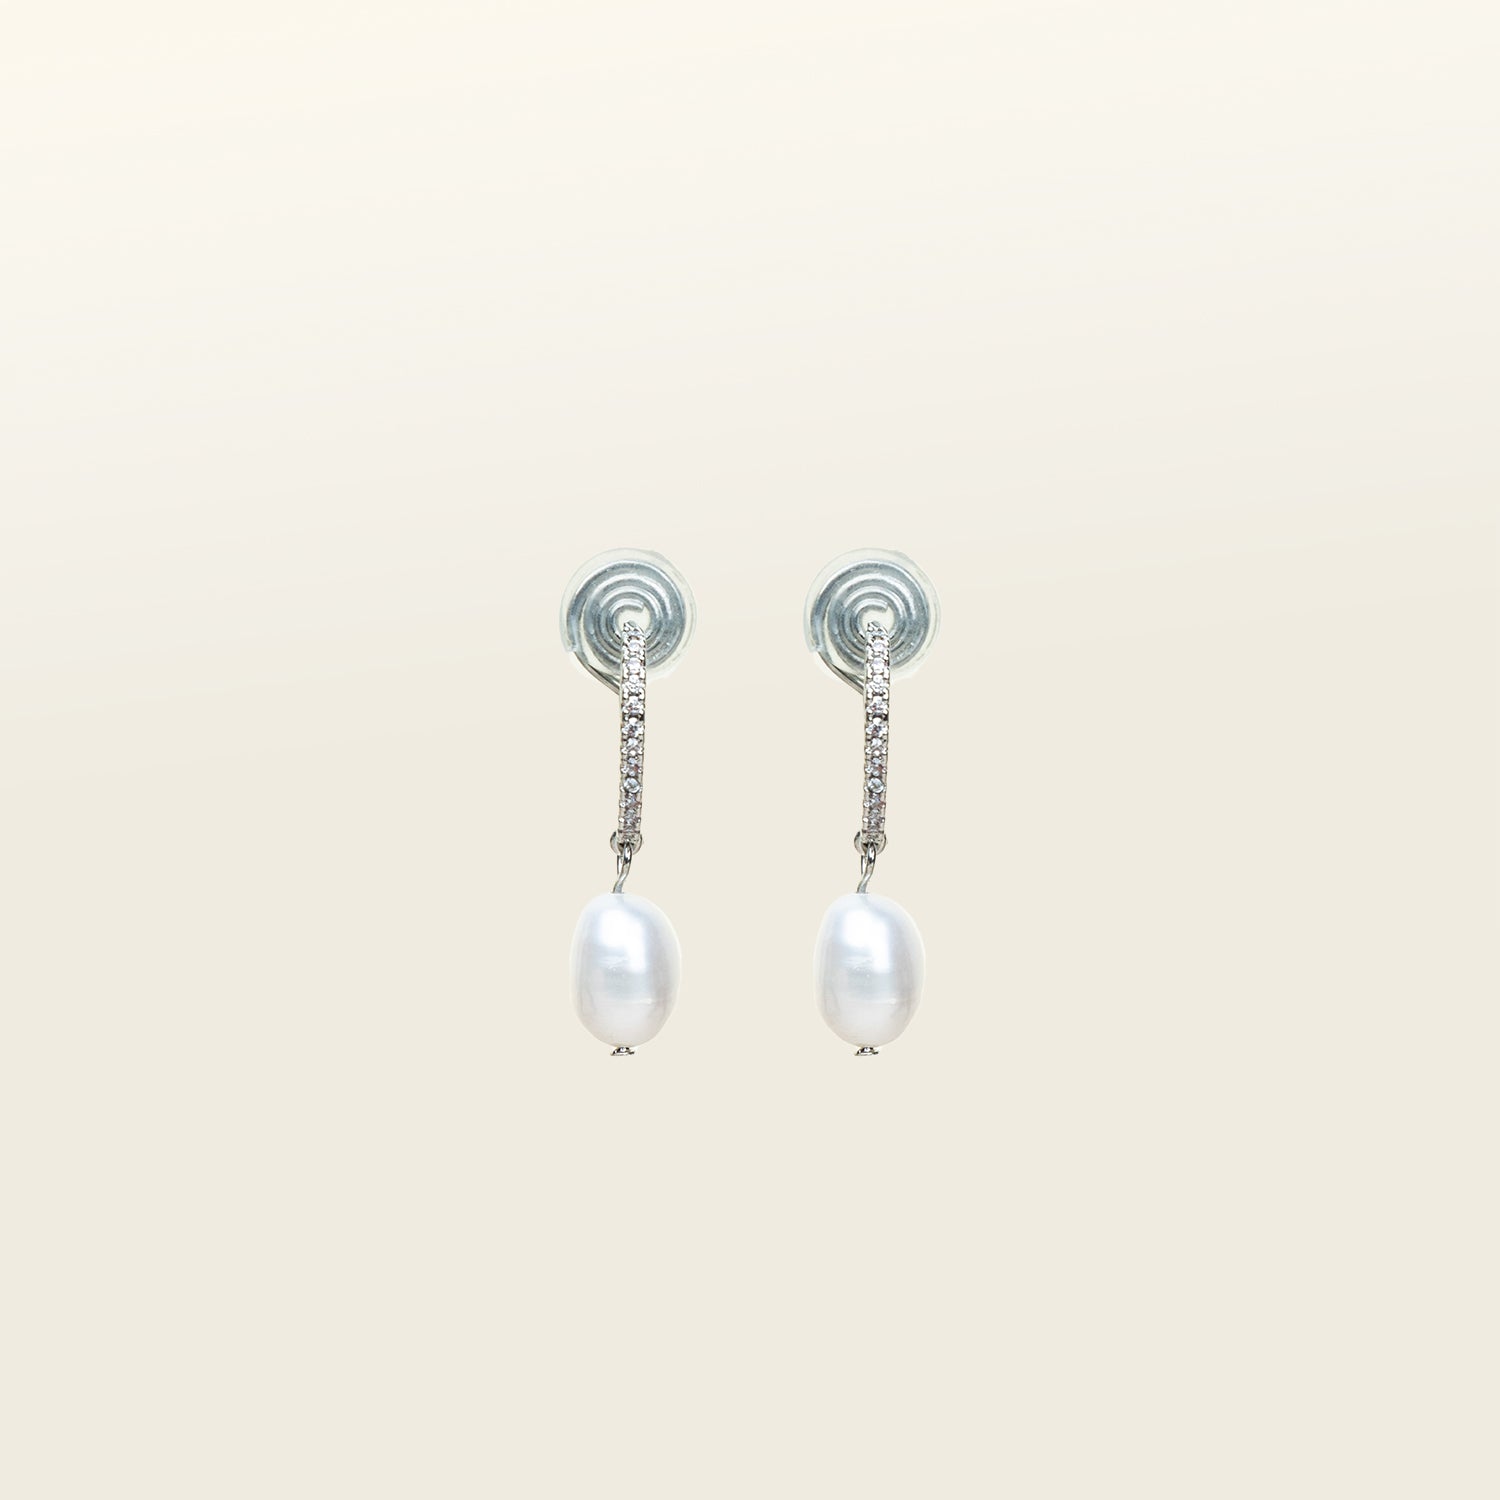 Image of the Pearl Pavé Huggie Clip-On Earrings in Silver feature a mosquito coil clip-on closure and are suitable for all ear types including thick/large, sensitive, small/thin and stretched/healing ears. For a secure but comfortable hold, they can be worn for up to 24 hours and can be adjusted with a gentle squeeze of the padding. Made with Freshwater Pearls and Silver Plated Brass, each pair has natural variations in size and colour.